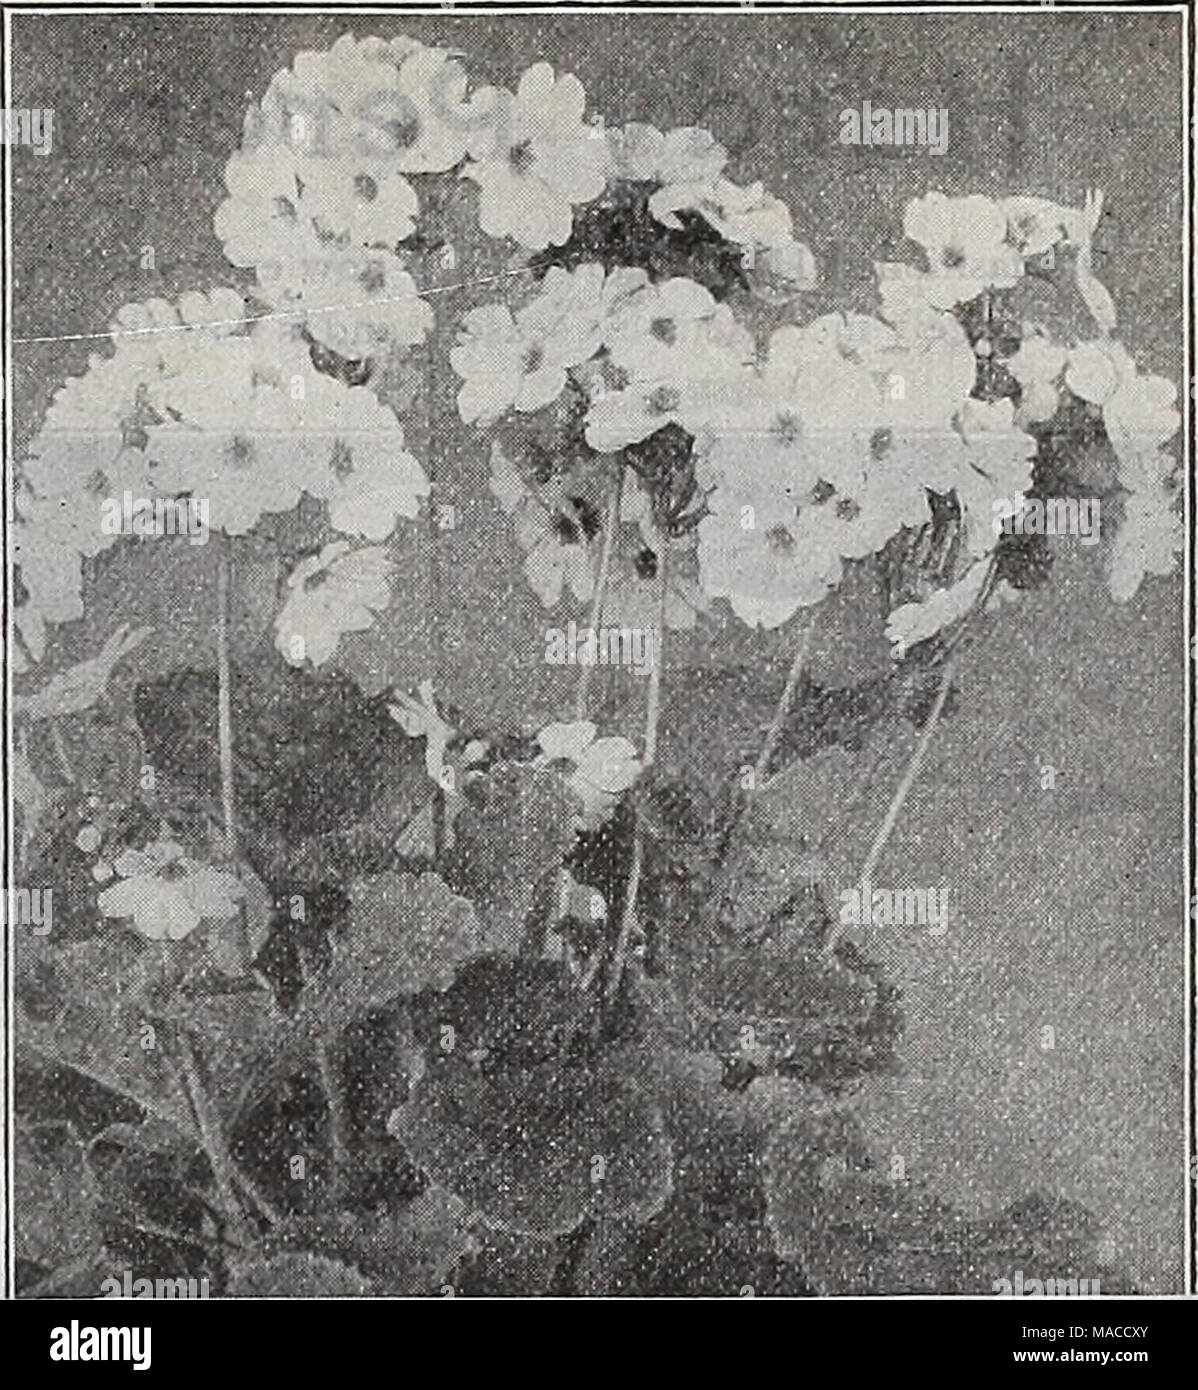 . Dreer's wholesale price list : seeds for florists plants for florists bulbs for florists vegetable seeds, fungicides, fertilizers, insecticides, implements, sundries, etc . PRIMULA OBCONICA GRANDIFLORA Vinca. Most useful plants. Seeds should be sown in brisk heat. Tr. pkt. Rosea. Rose, with darker eye 15 Alba. White, with rose eye 15 &quot; &quot; Pura. Pure white 15 &quot; nixed. All colon 15 Viola (Tufted Pansies). Cornuta Papillo (Butterfly Violet). Blue Lutea splendens. Clear yellow . Blue Perfection. Deep blue . White Perfection. Fine white . Hybrida Admirabilis nixed. All colors Odorat Stock Photo